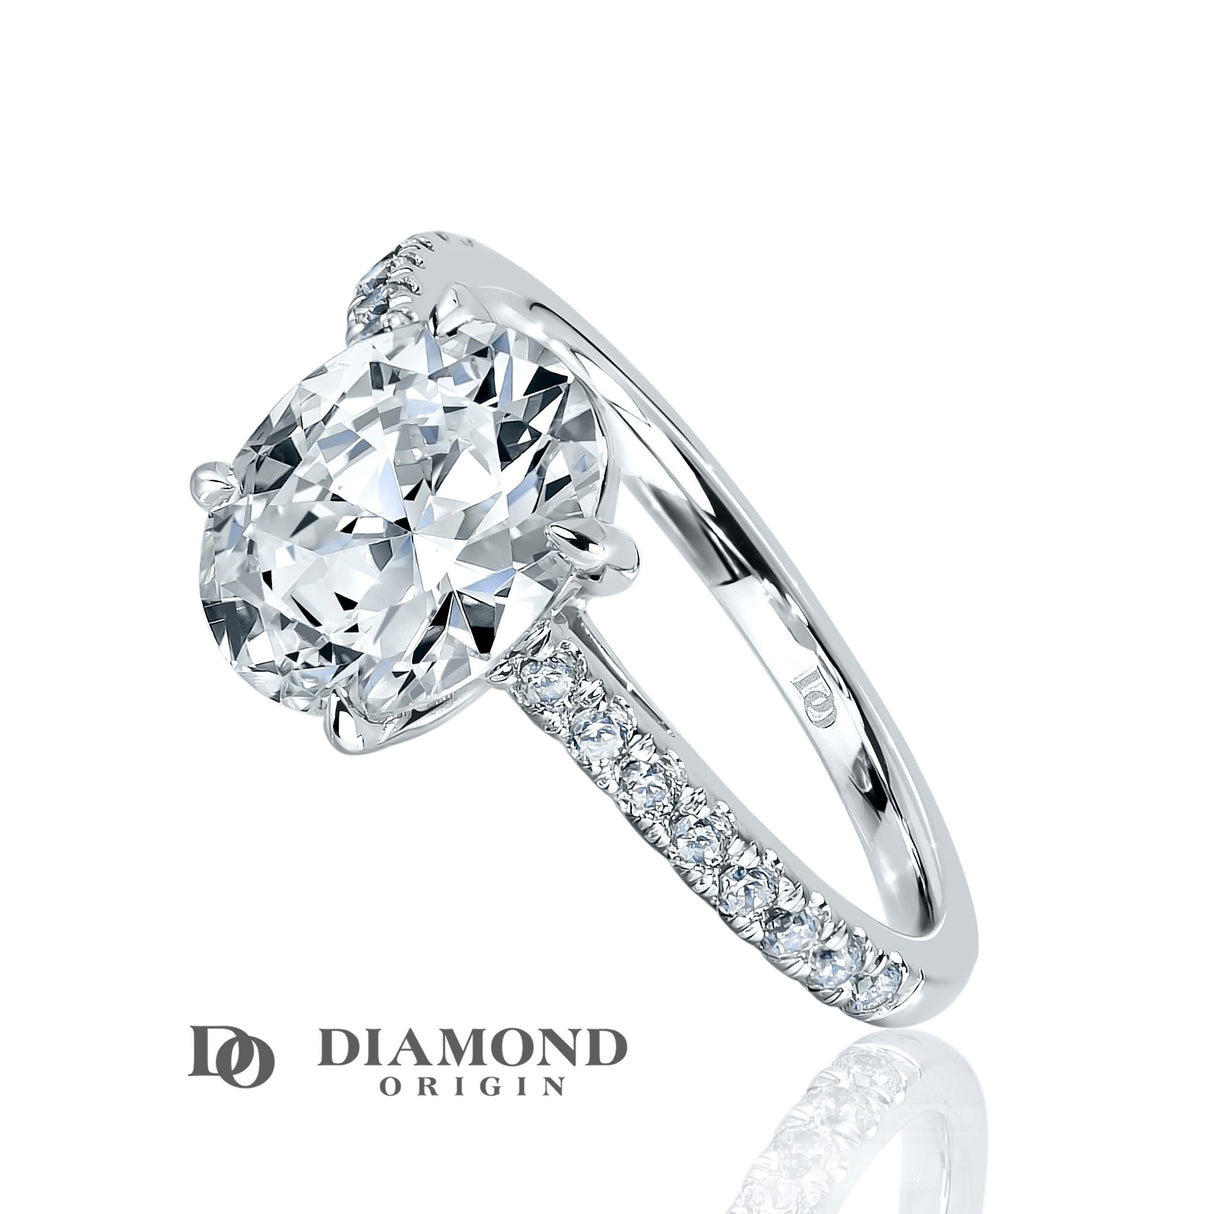 Diamond Oval Solitaire Ring brings a timeless beauty to any look. The Central Stone is 2Ct, with diamond side accents for added sparkle, diamond ring, diamond rings, lab created diamond, lab crated diamonds, 2 ct diamond, lab grown diamonds